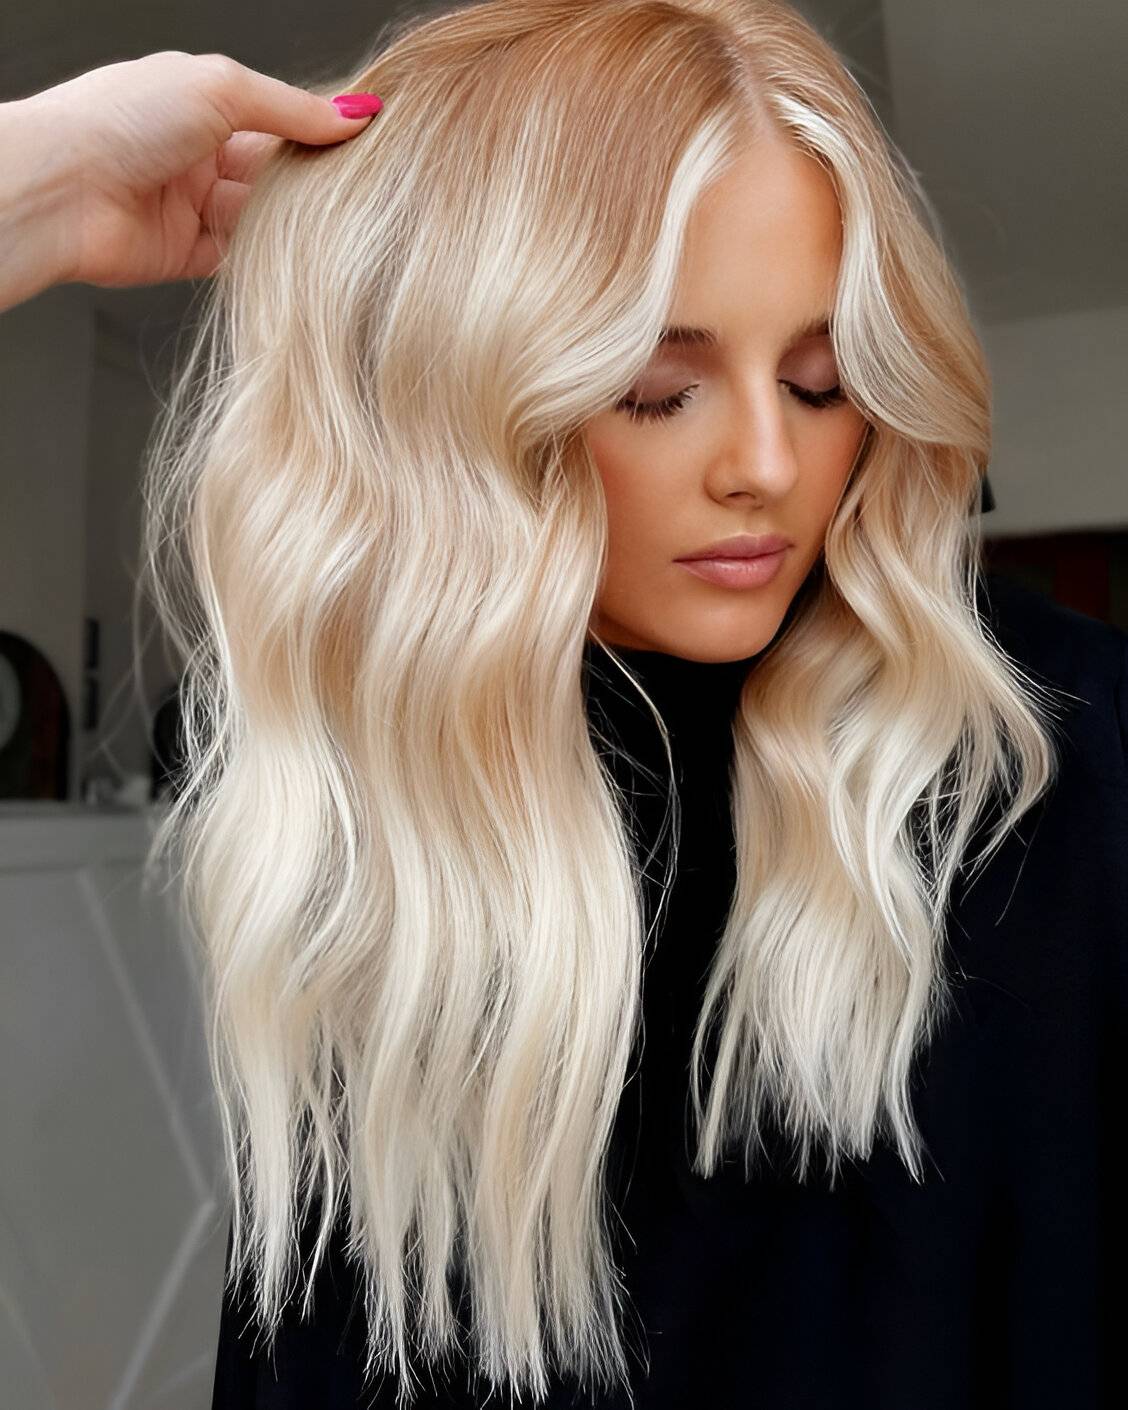 25 Stunning Blonde Hair Color Ideas Beautiful For Every Skin Tone - 163